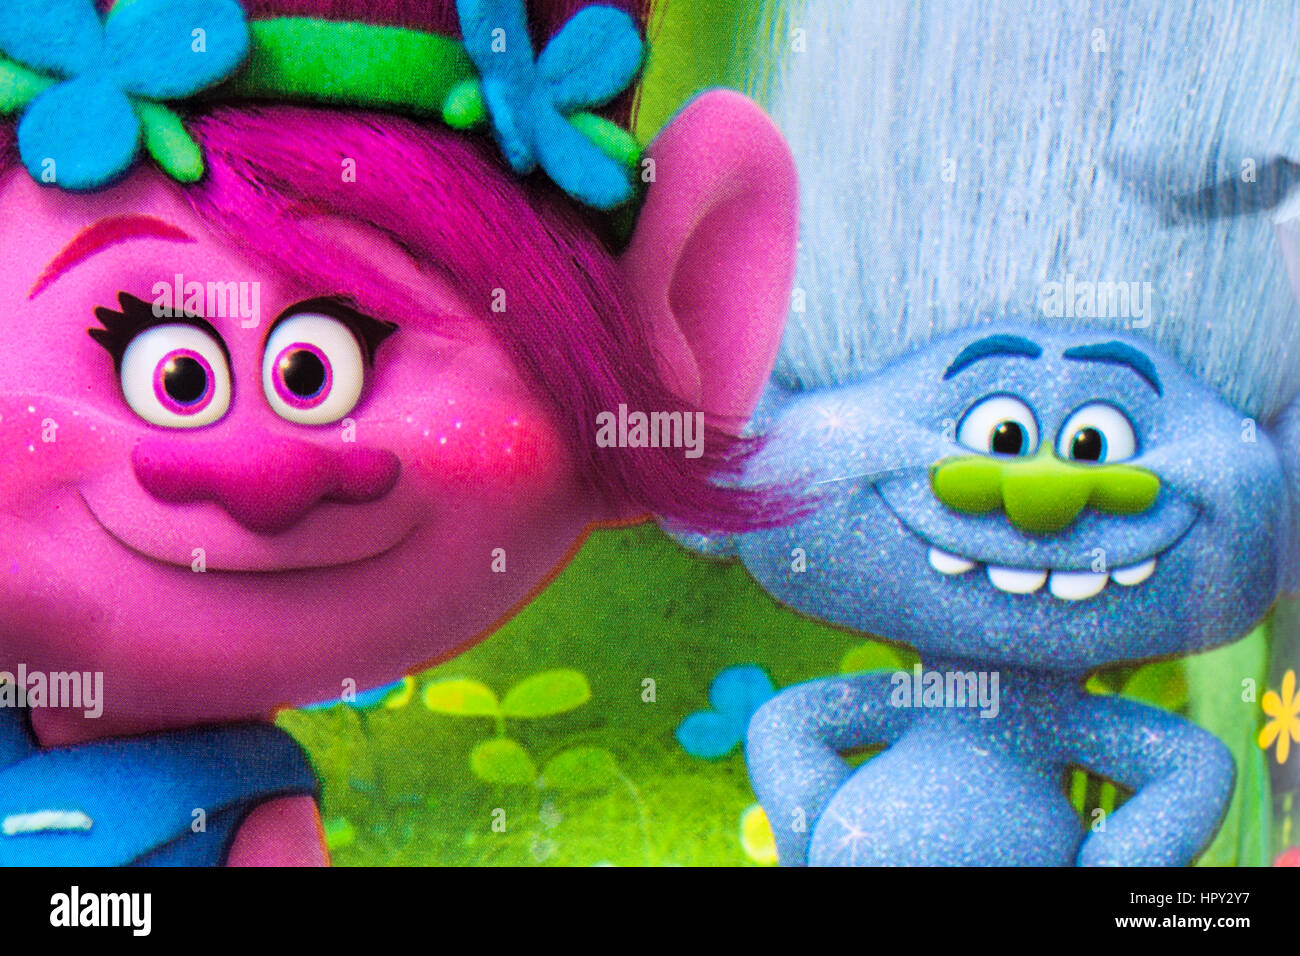 Close Up Detail Of Trolls Characters On Packet Of Nickelodeon Trolls Speckled Egglets Easter Eggs Stock Photo Alamy